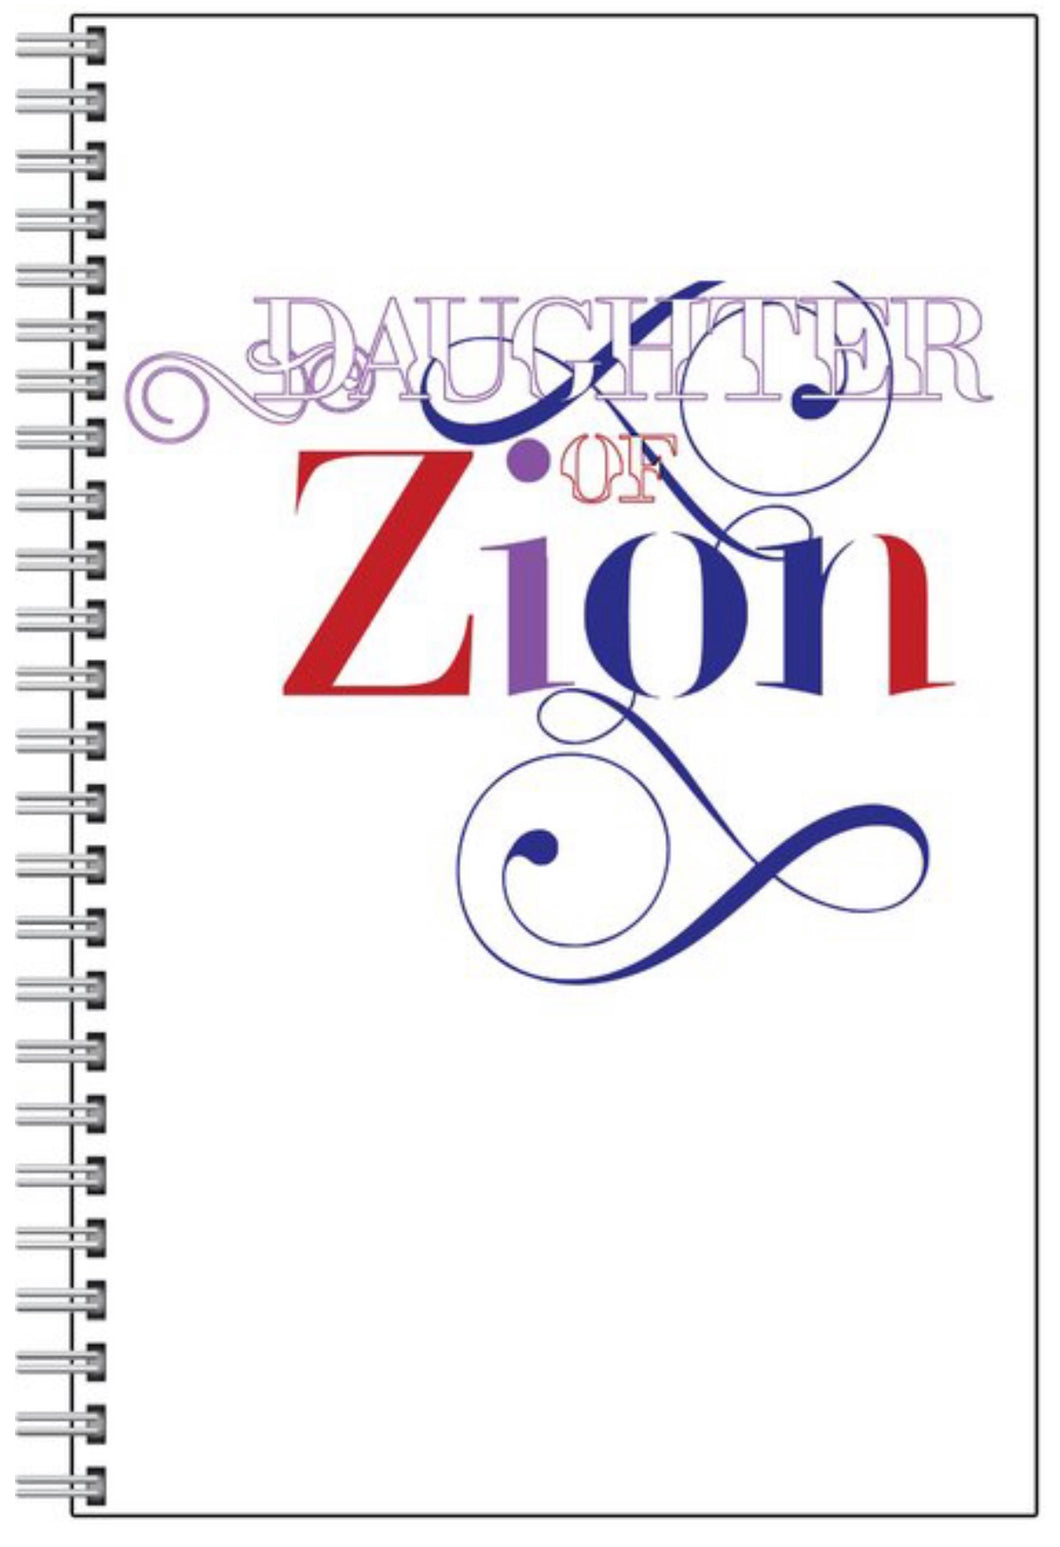 PRE-ORDER Notebook (Daughter of Zion)